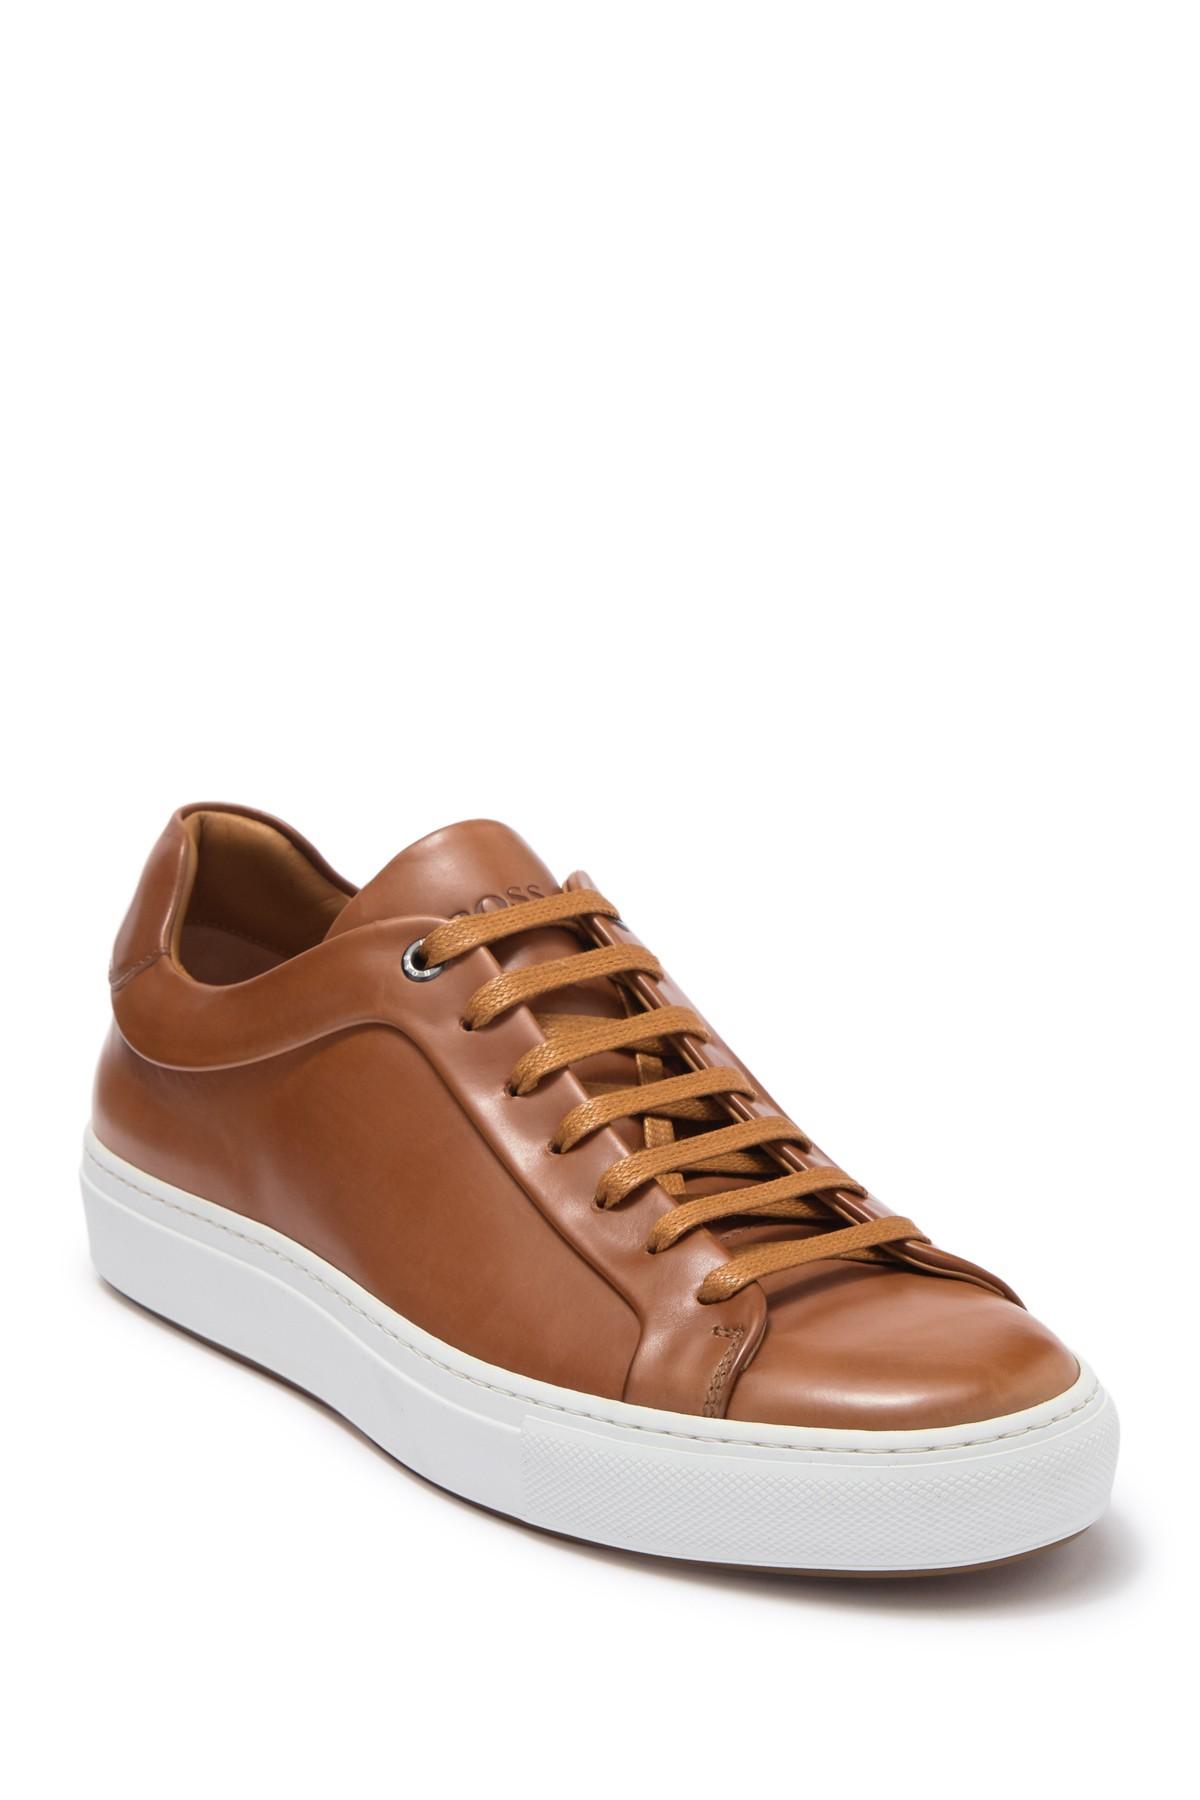 BOSS by HUGO BOSS Tennis-style Sneakers In Burnished Leather in Brown ...